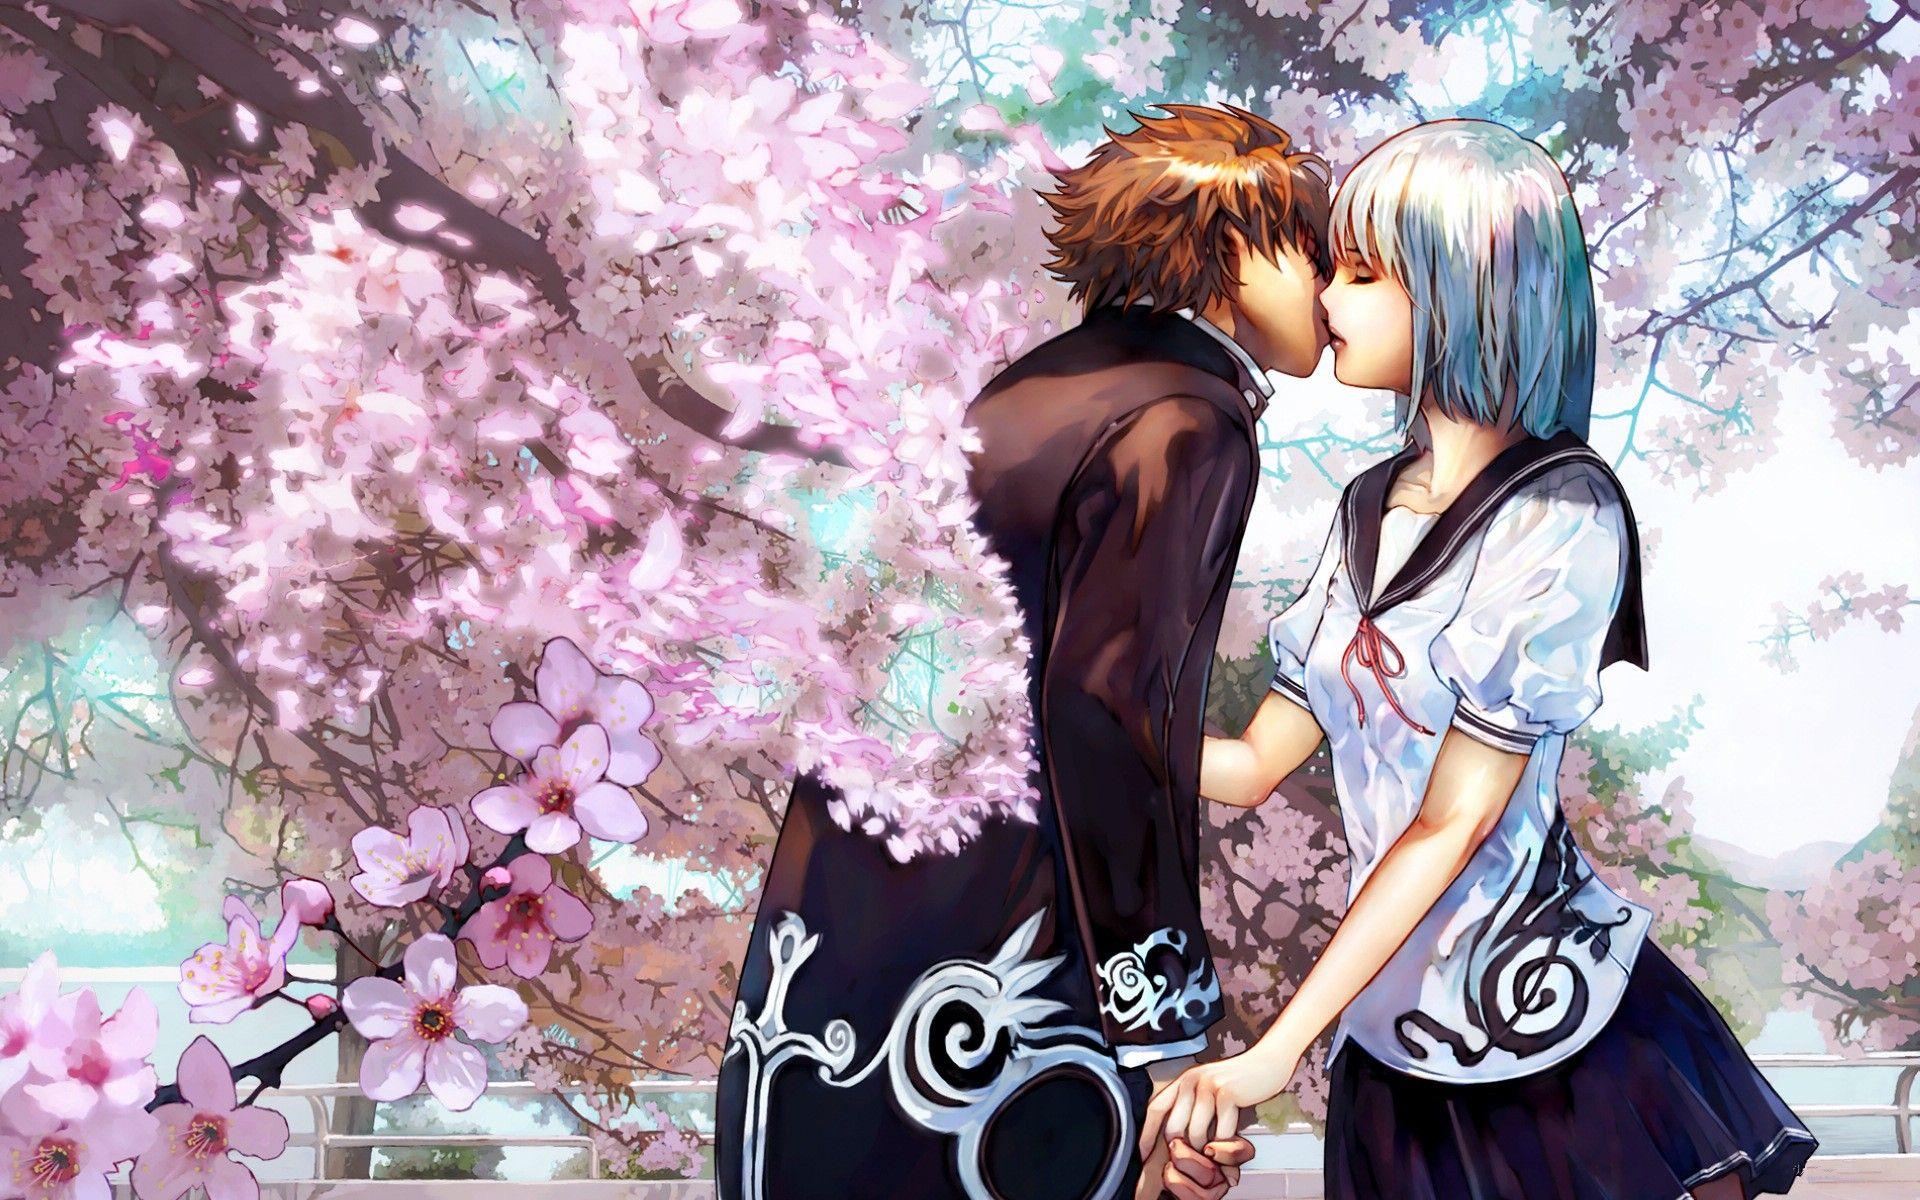 Anime Couple Kiss Animated Pictures for Sharing #135314958